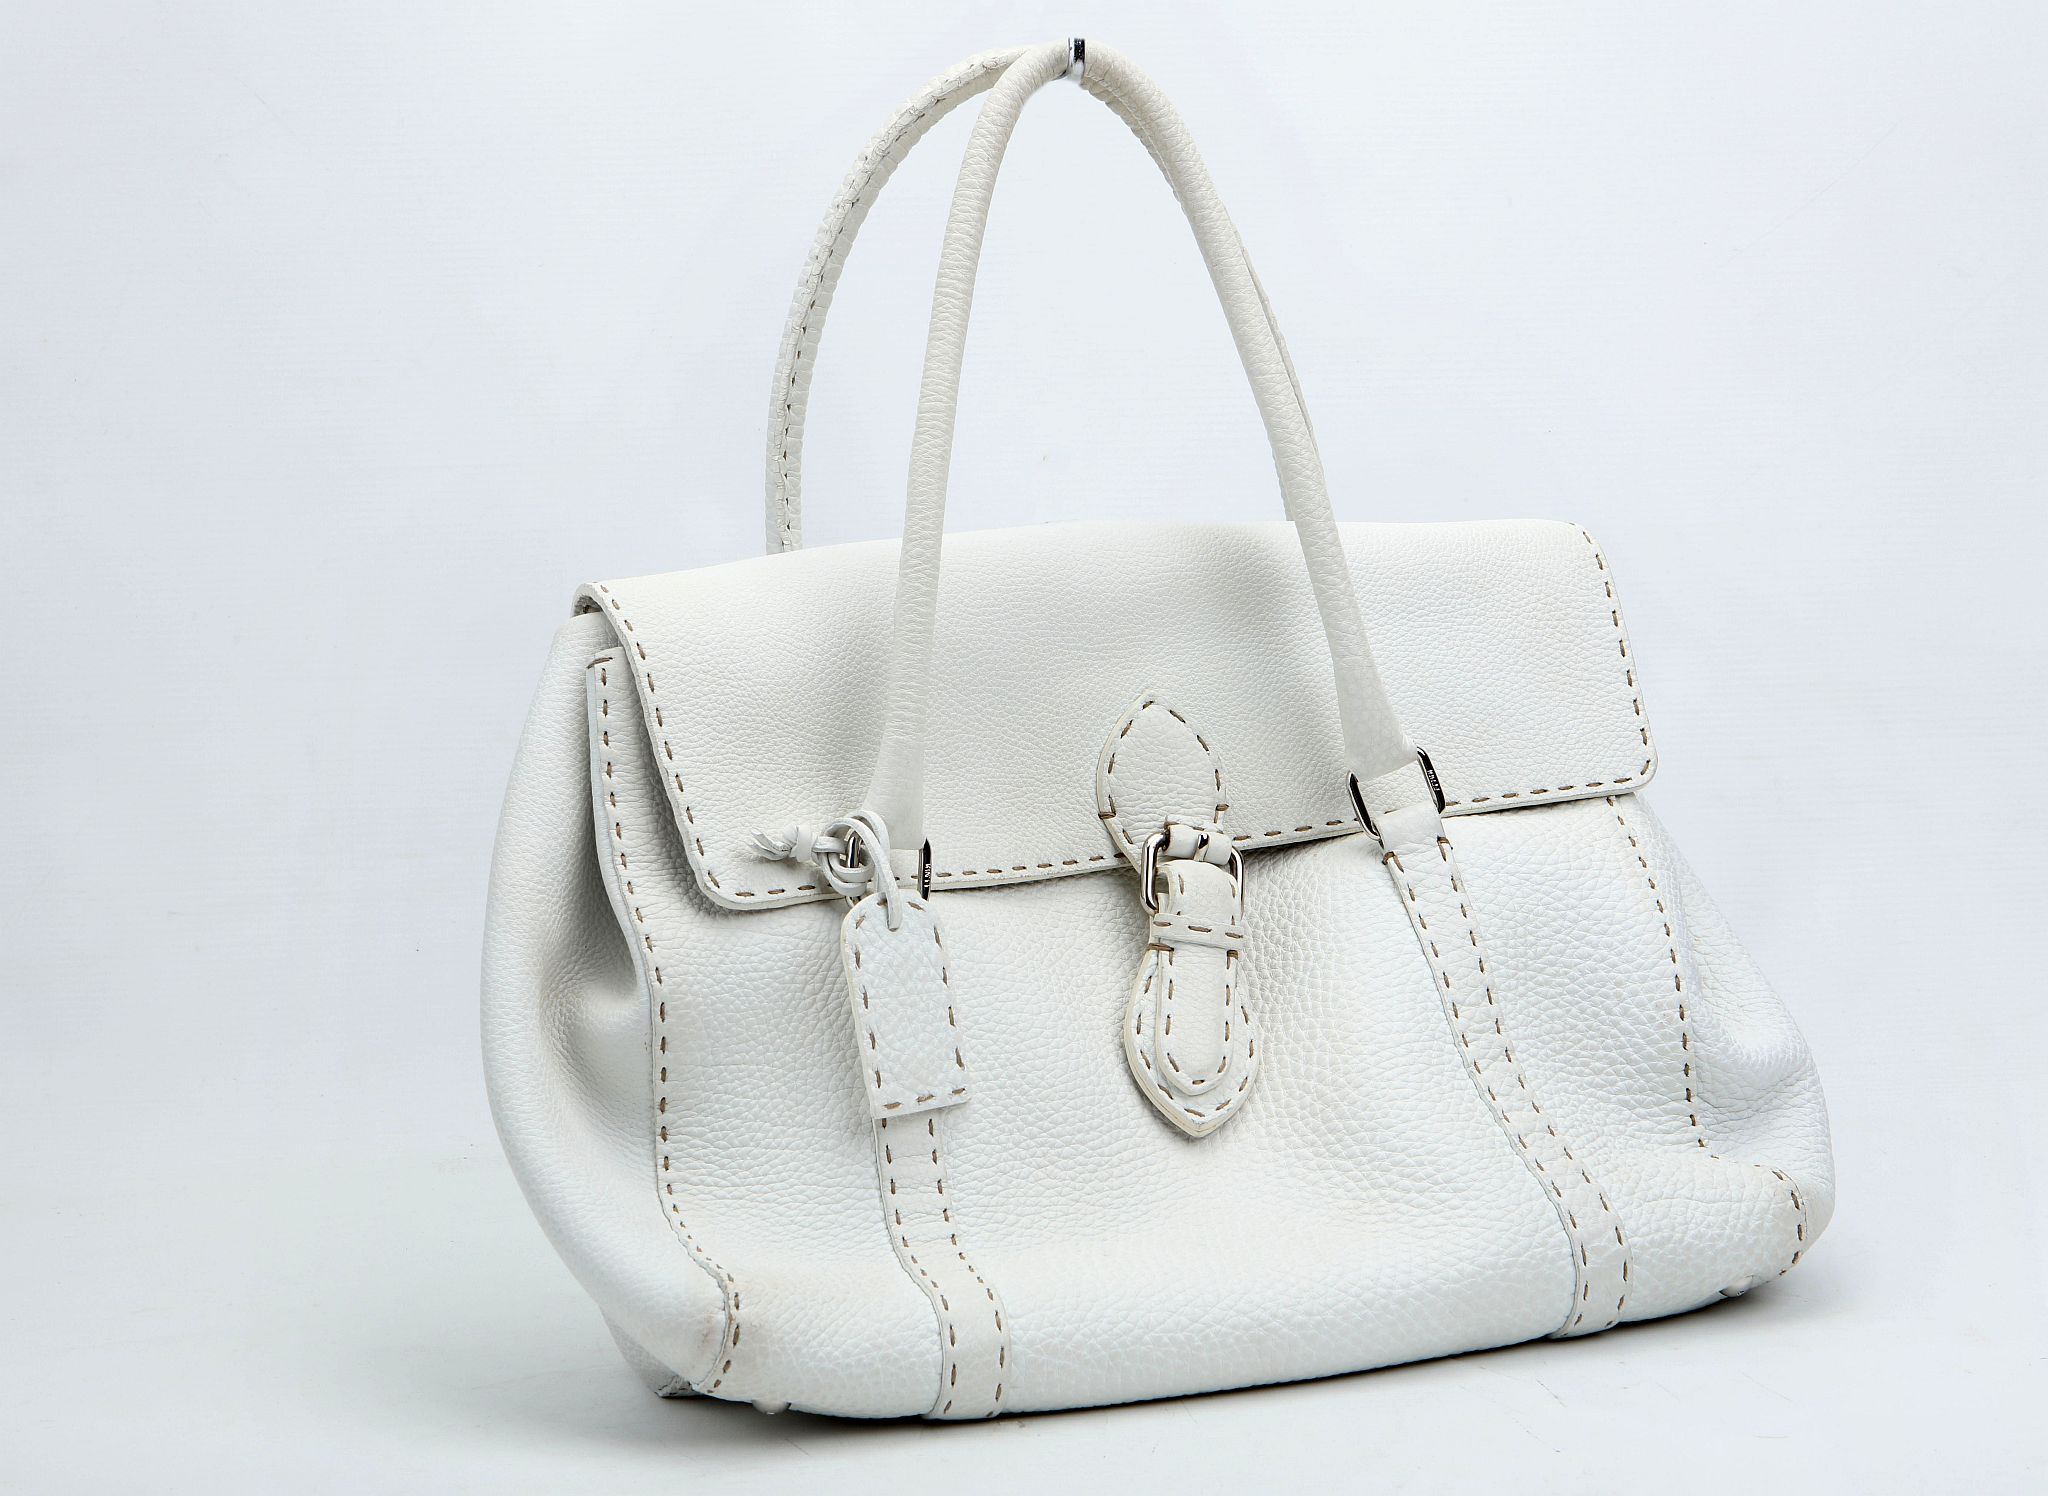 FENDI SELLERIA SHOULDER BAG, white stitched leather with silver tone hardware, 35cm wide, 30cm high, - Image 2 of 12